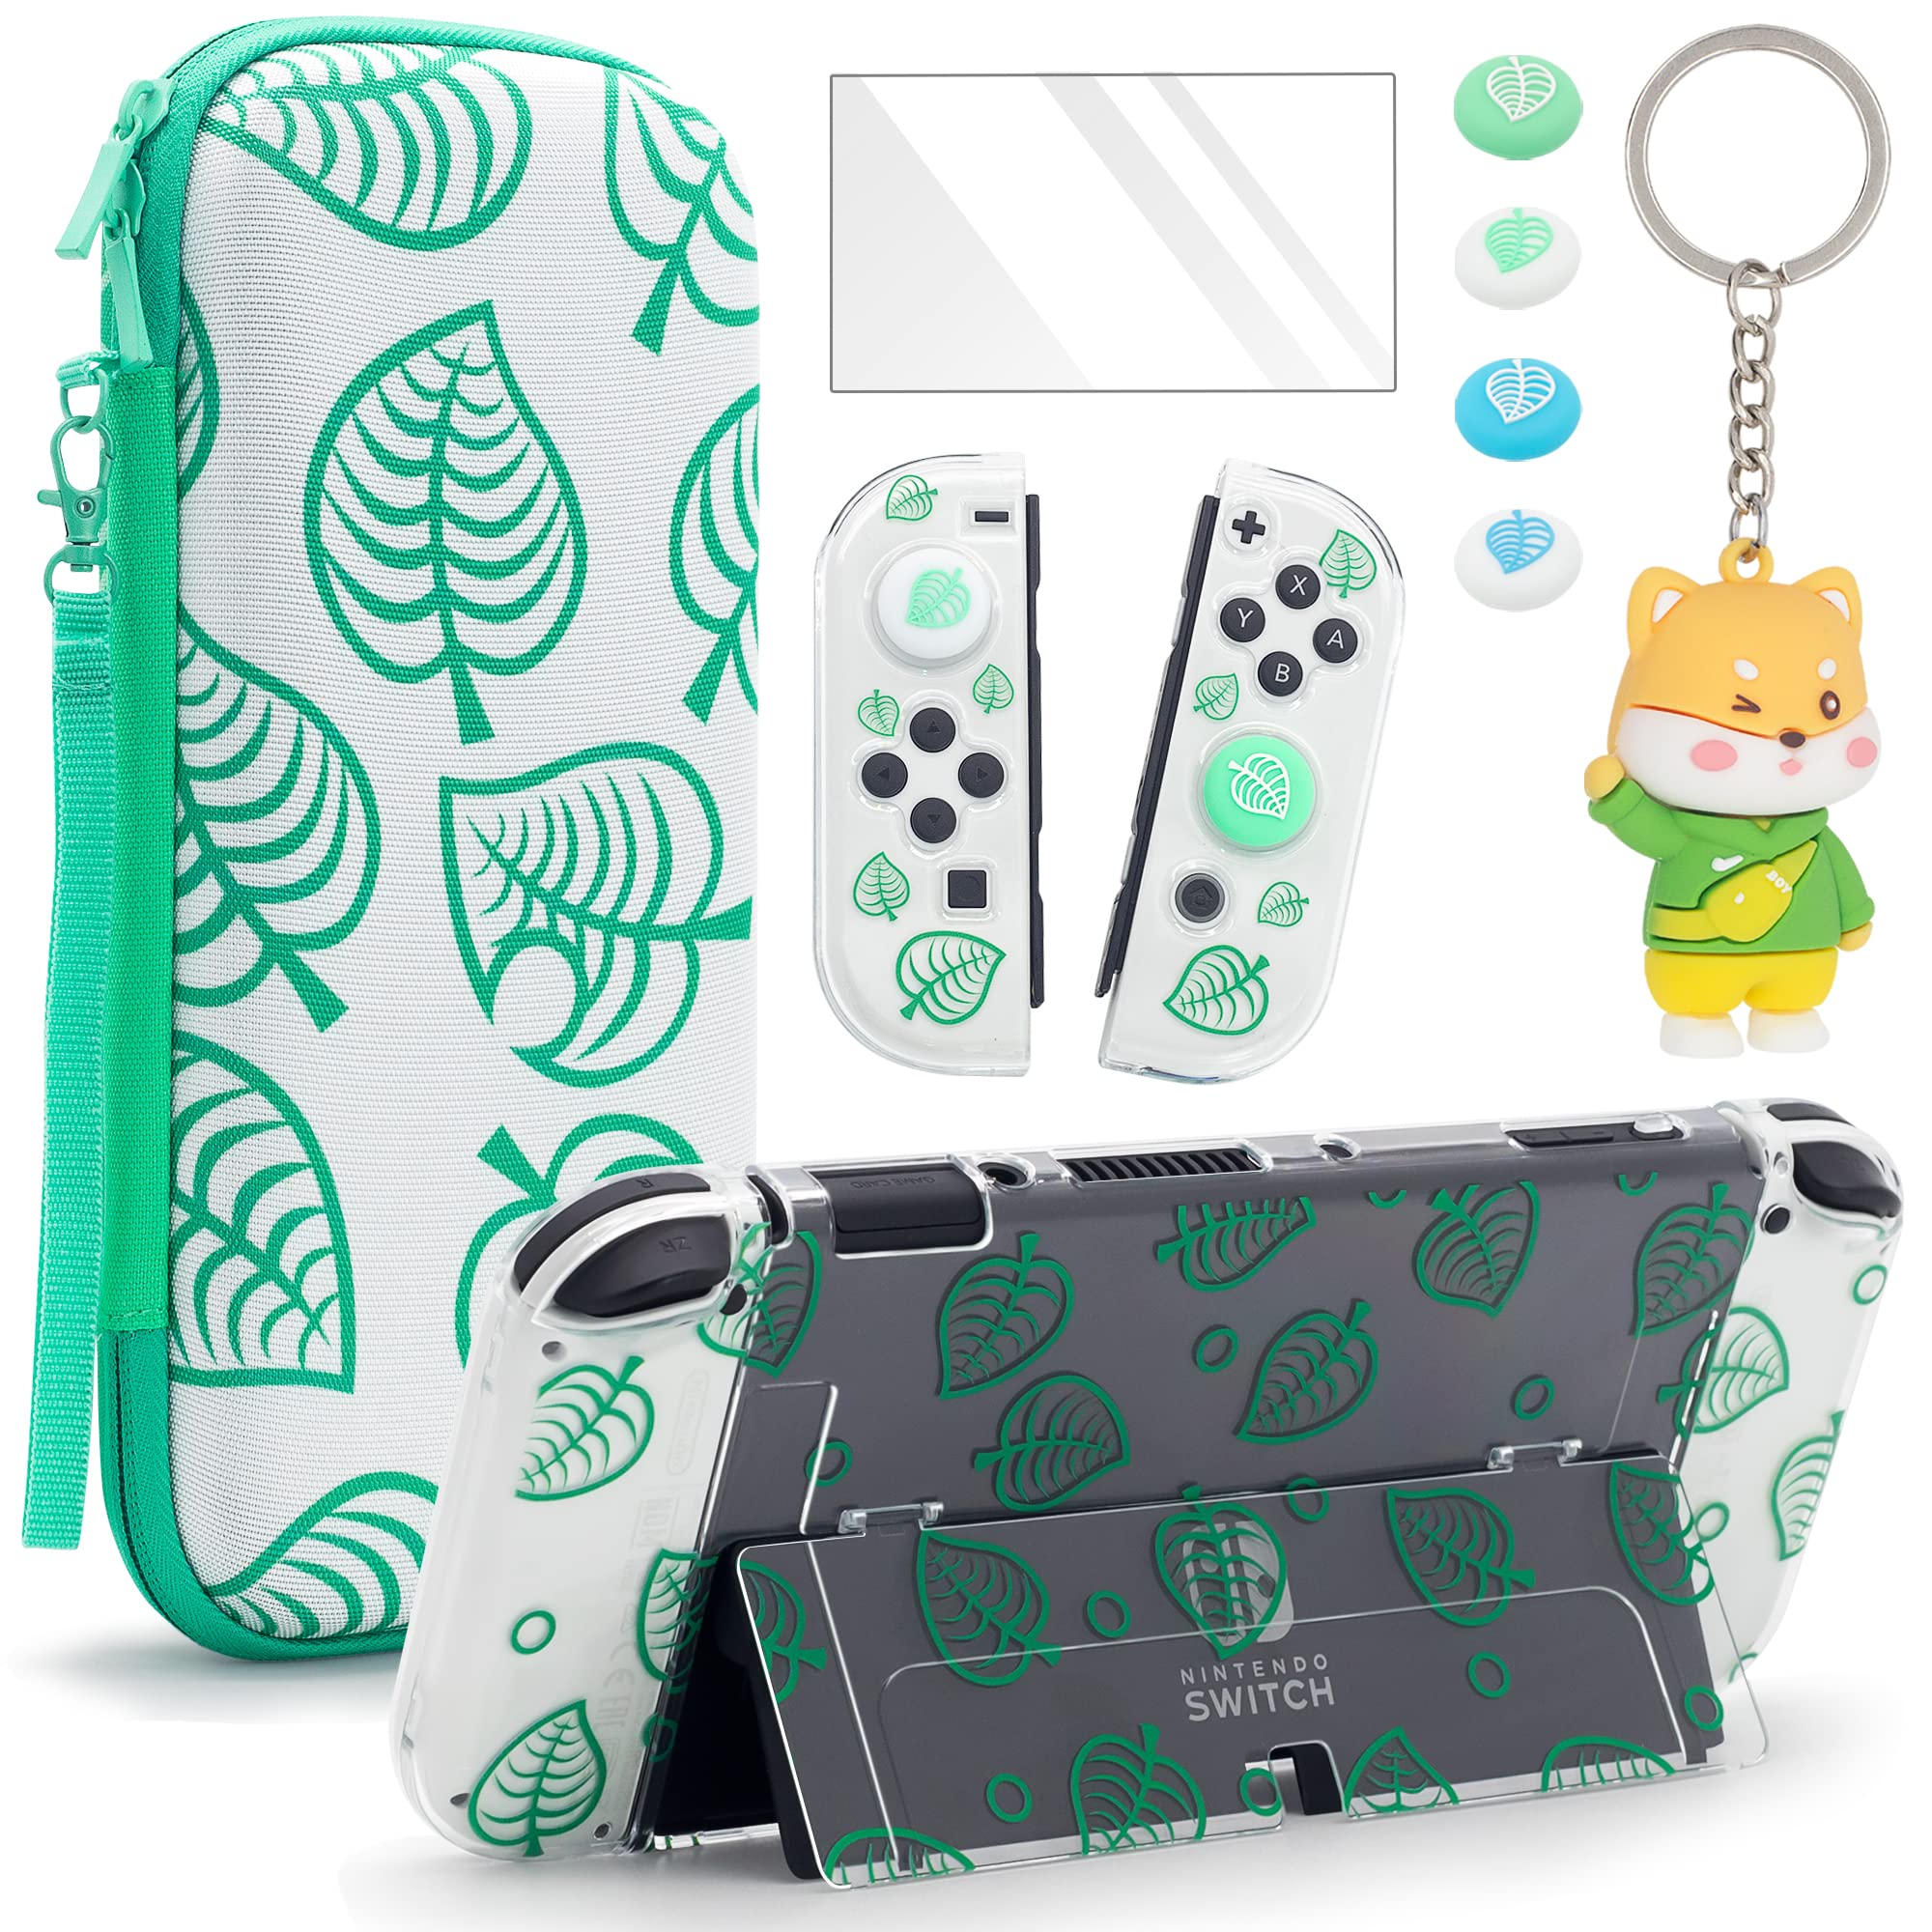 Switch Carry Case for Nintendo Switch OLED, Travel Carrying Switch Case Bundle Bag Portable Protective Accessories Kit (Animal Crossing)